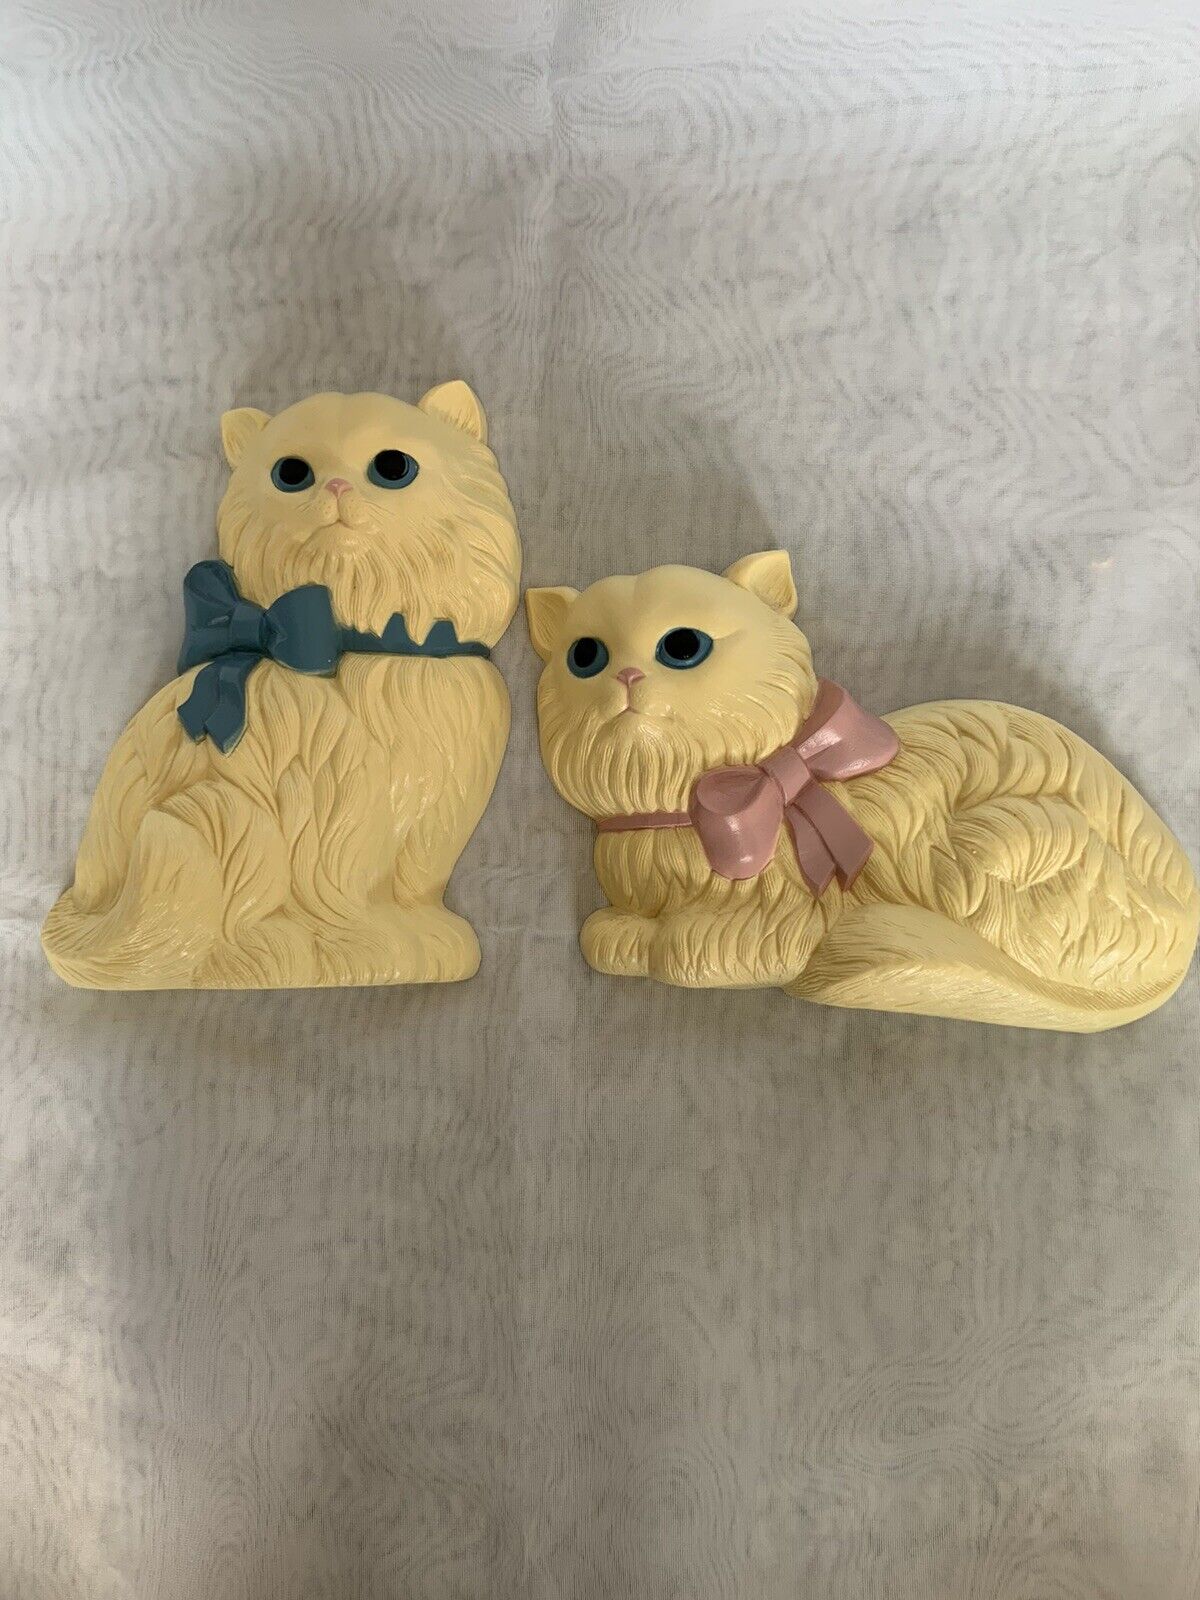 Vintage Persian Cat Molded Plastic Wall Hangings Decor